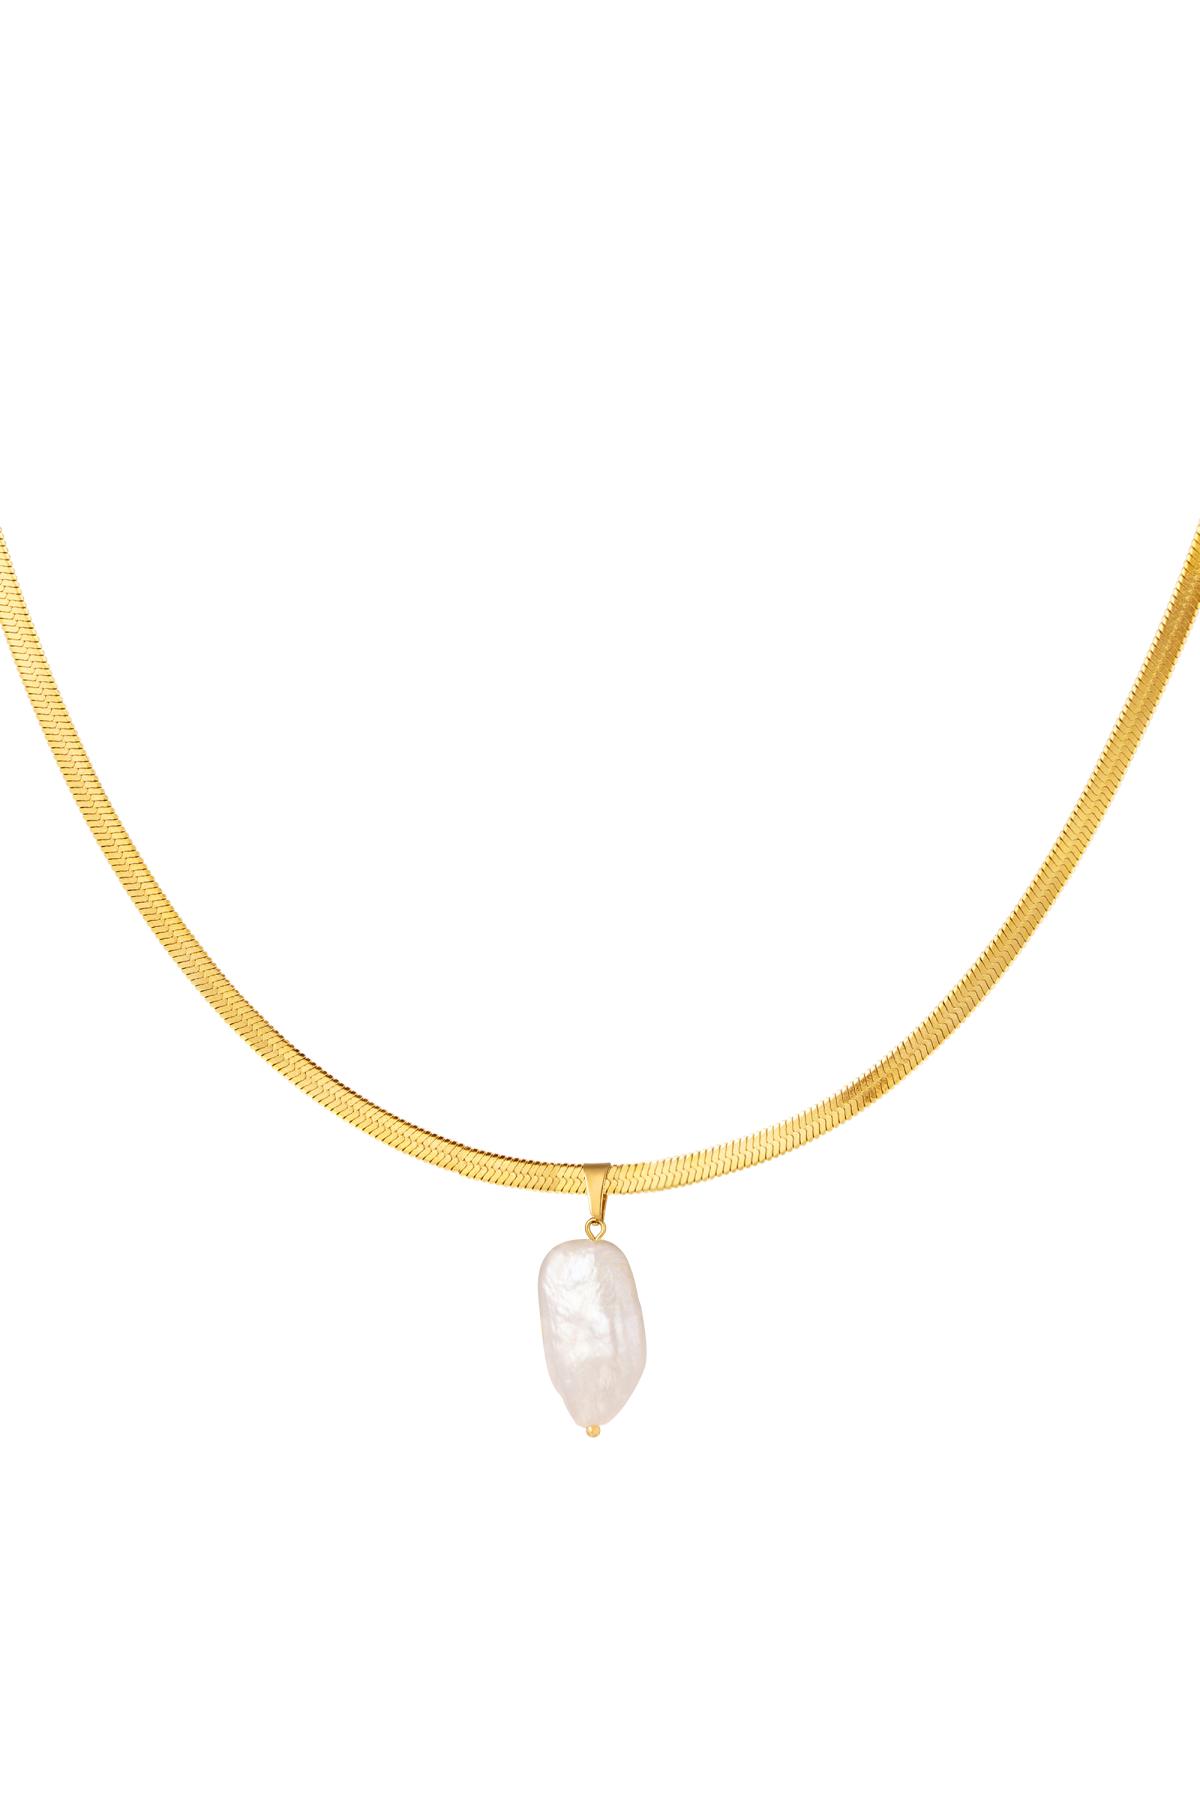 Necklace pearl charm Gold Stainless Steel